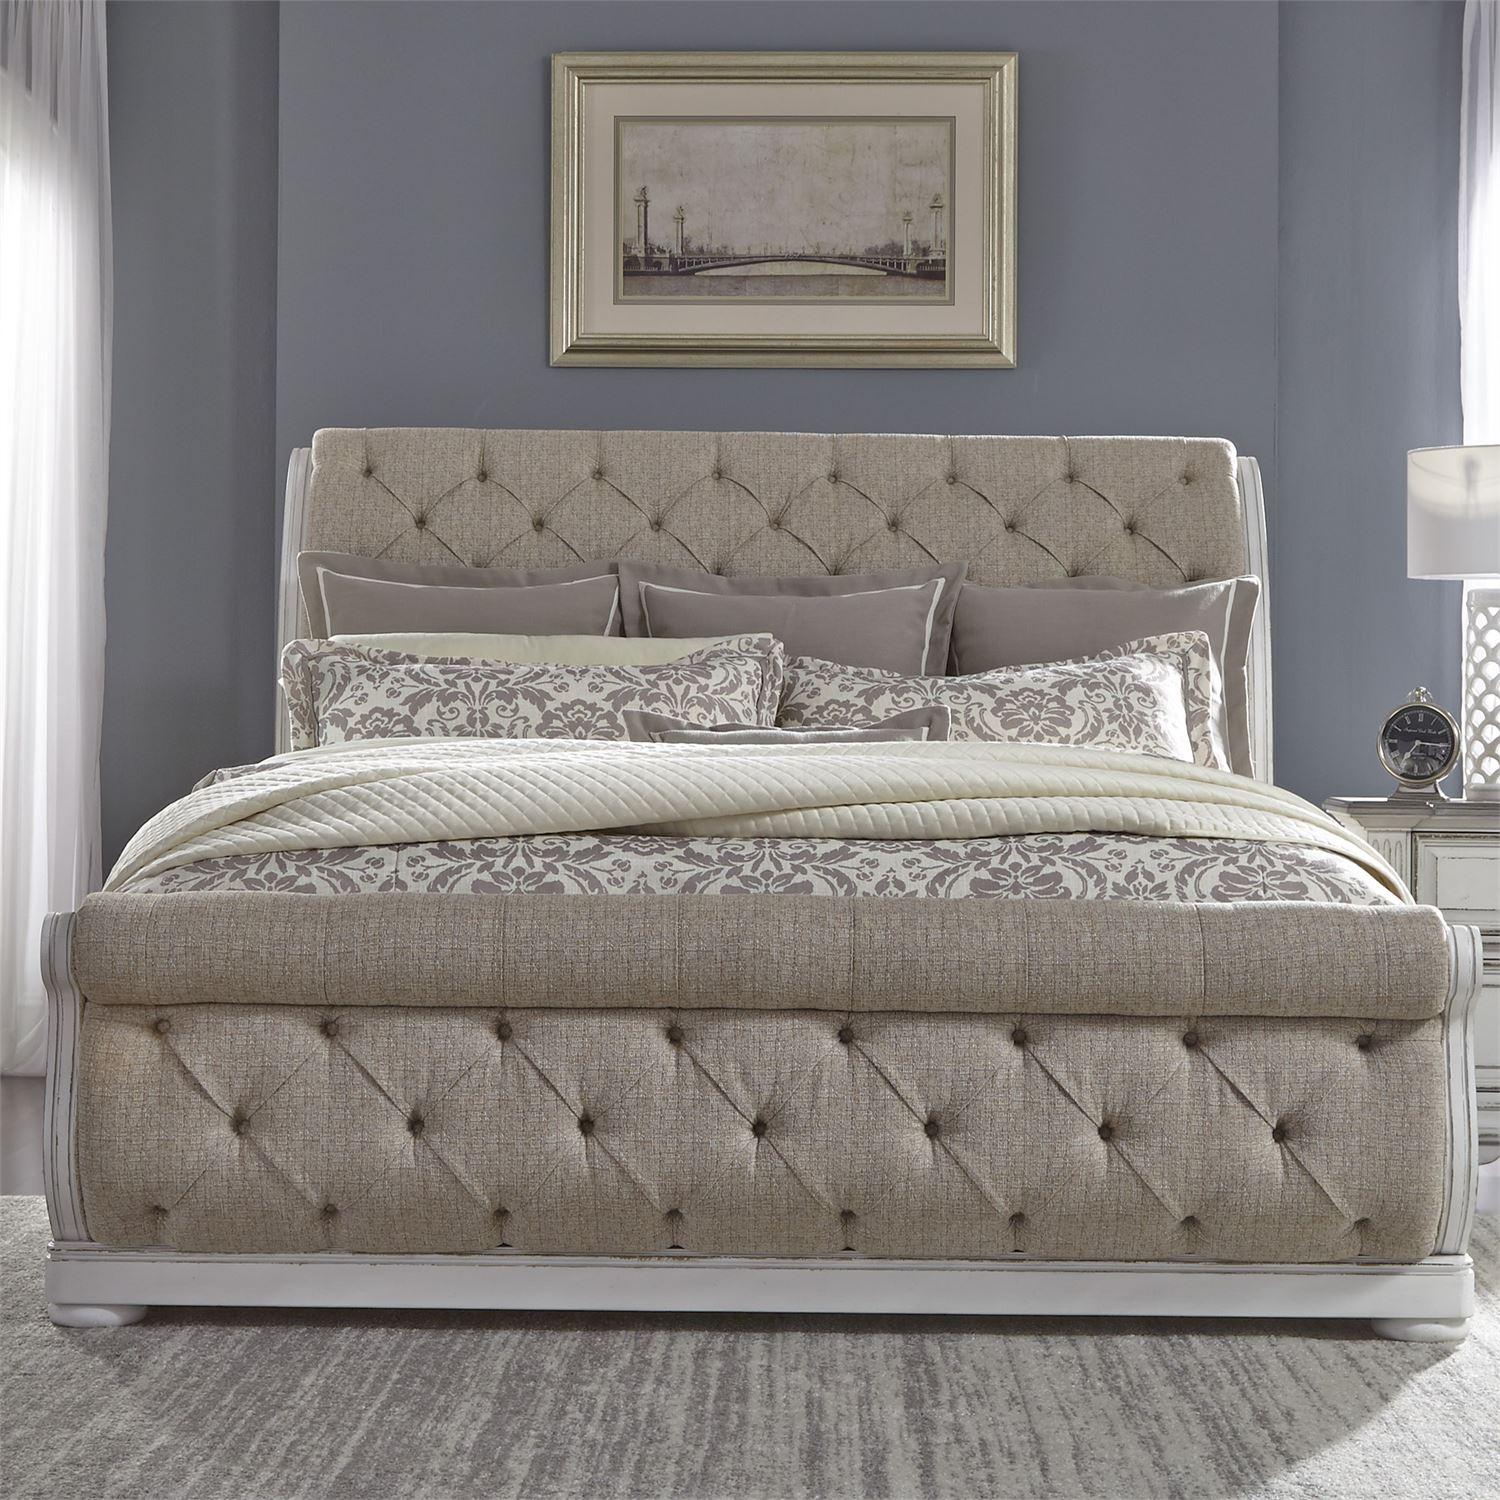 Traditional Sleigh Bed Abbey Park 520-BR-QUSL 520-BR-QUSL in White 